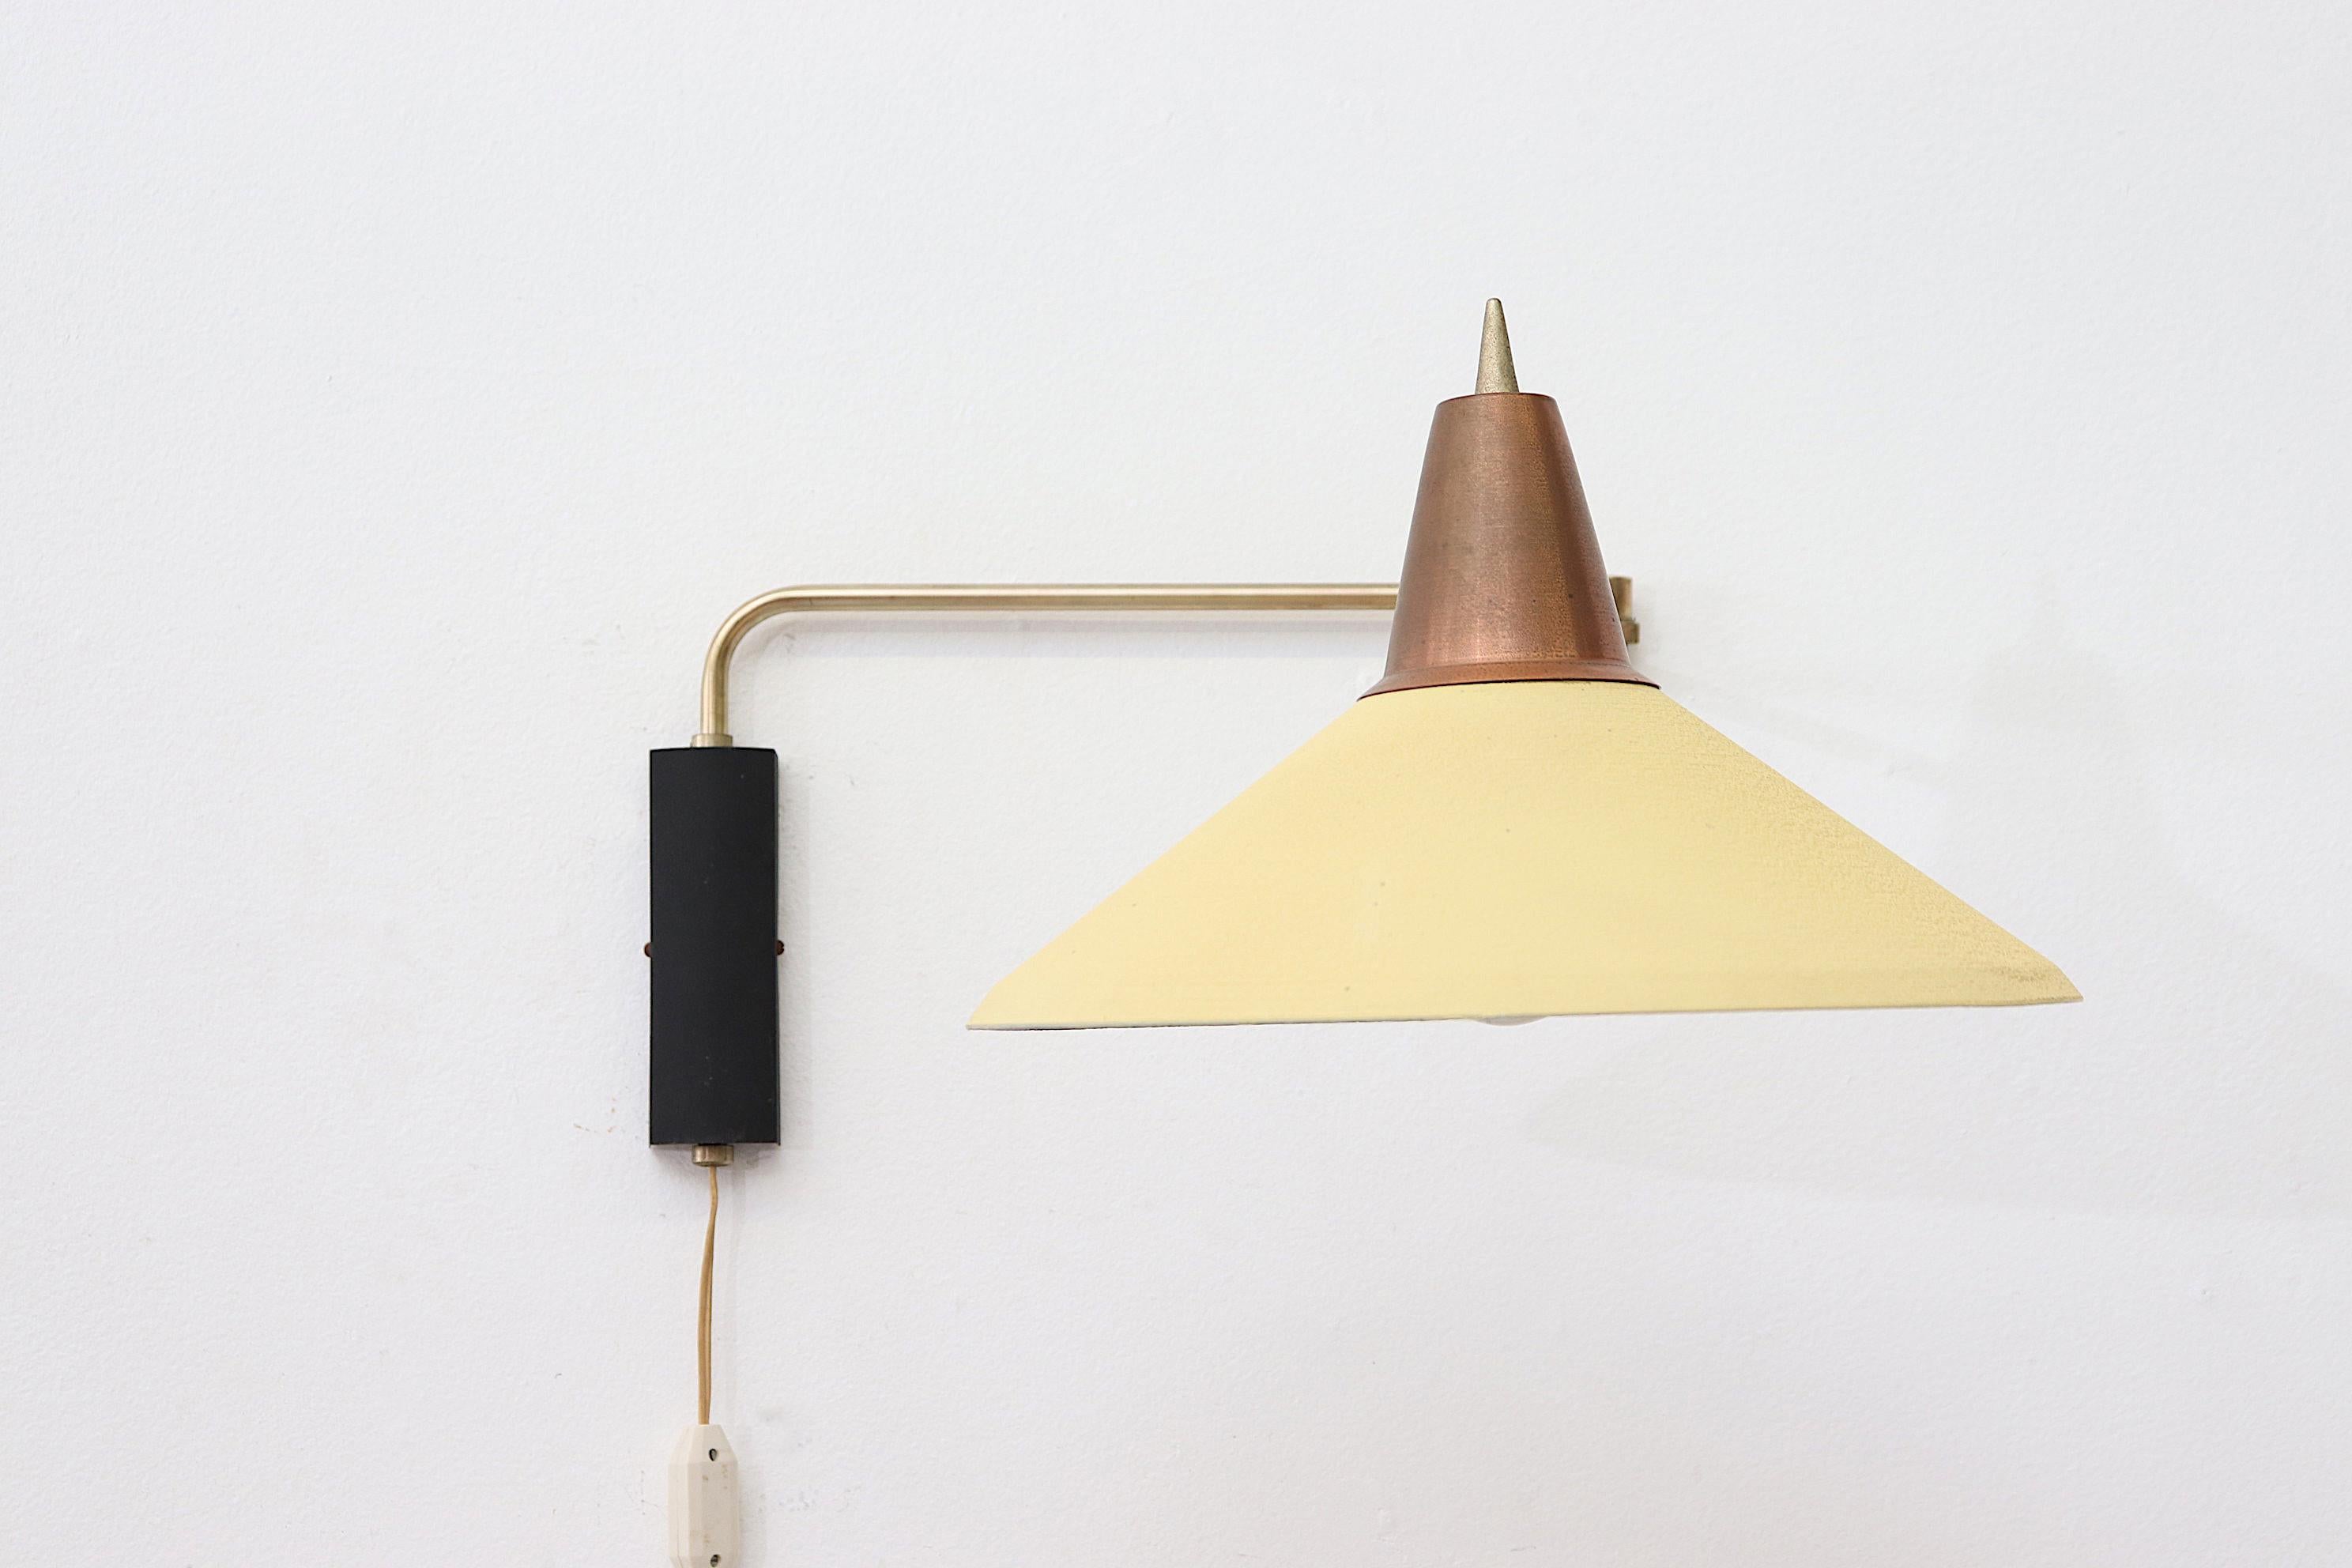 Yellow and copper Rietveld style industrial wall mount lamp with an articulating arm and black metal wall mount. In original condition with visible wear and patina consistent with its age and usage, another one is available with black shade